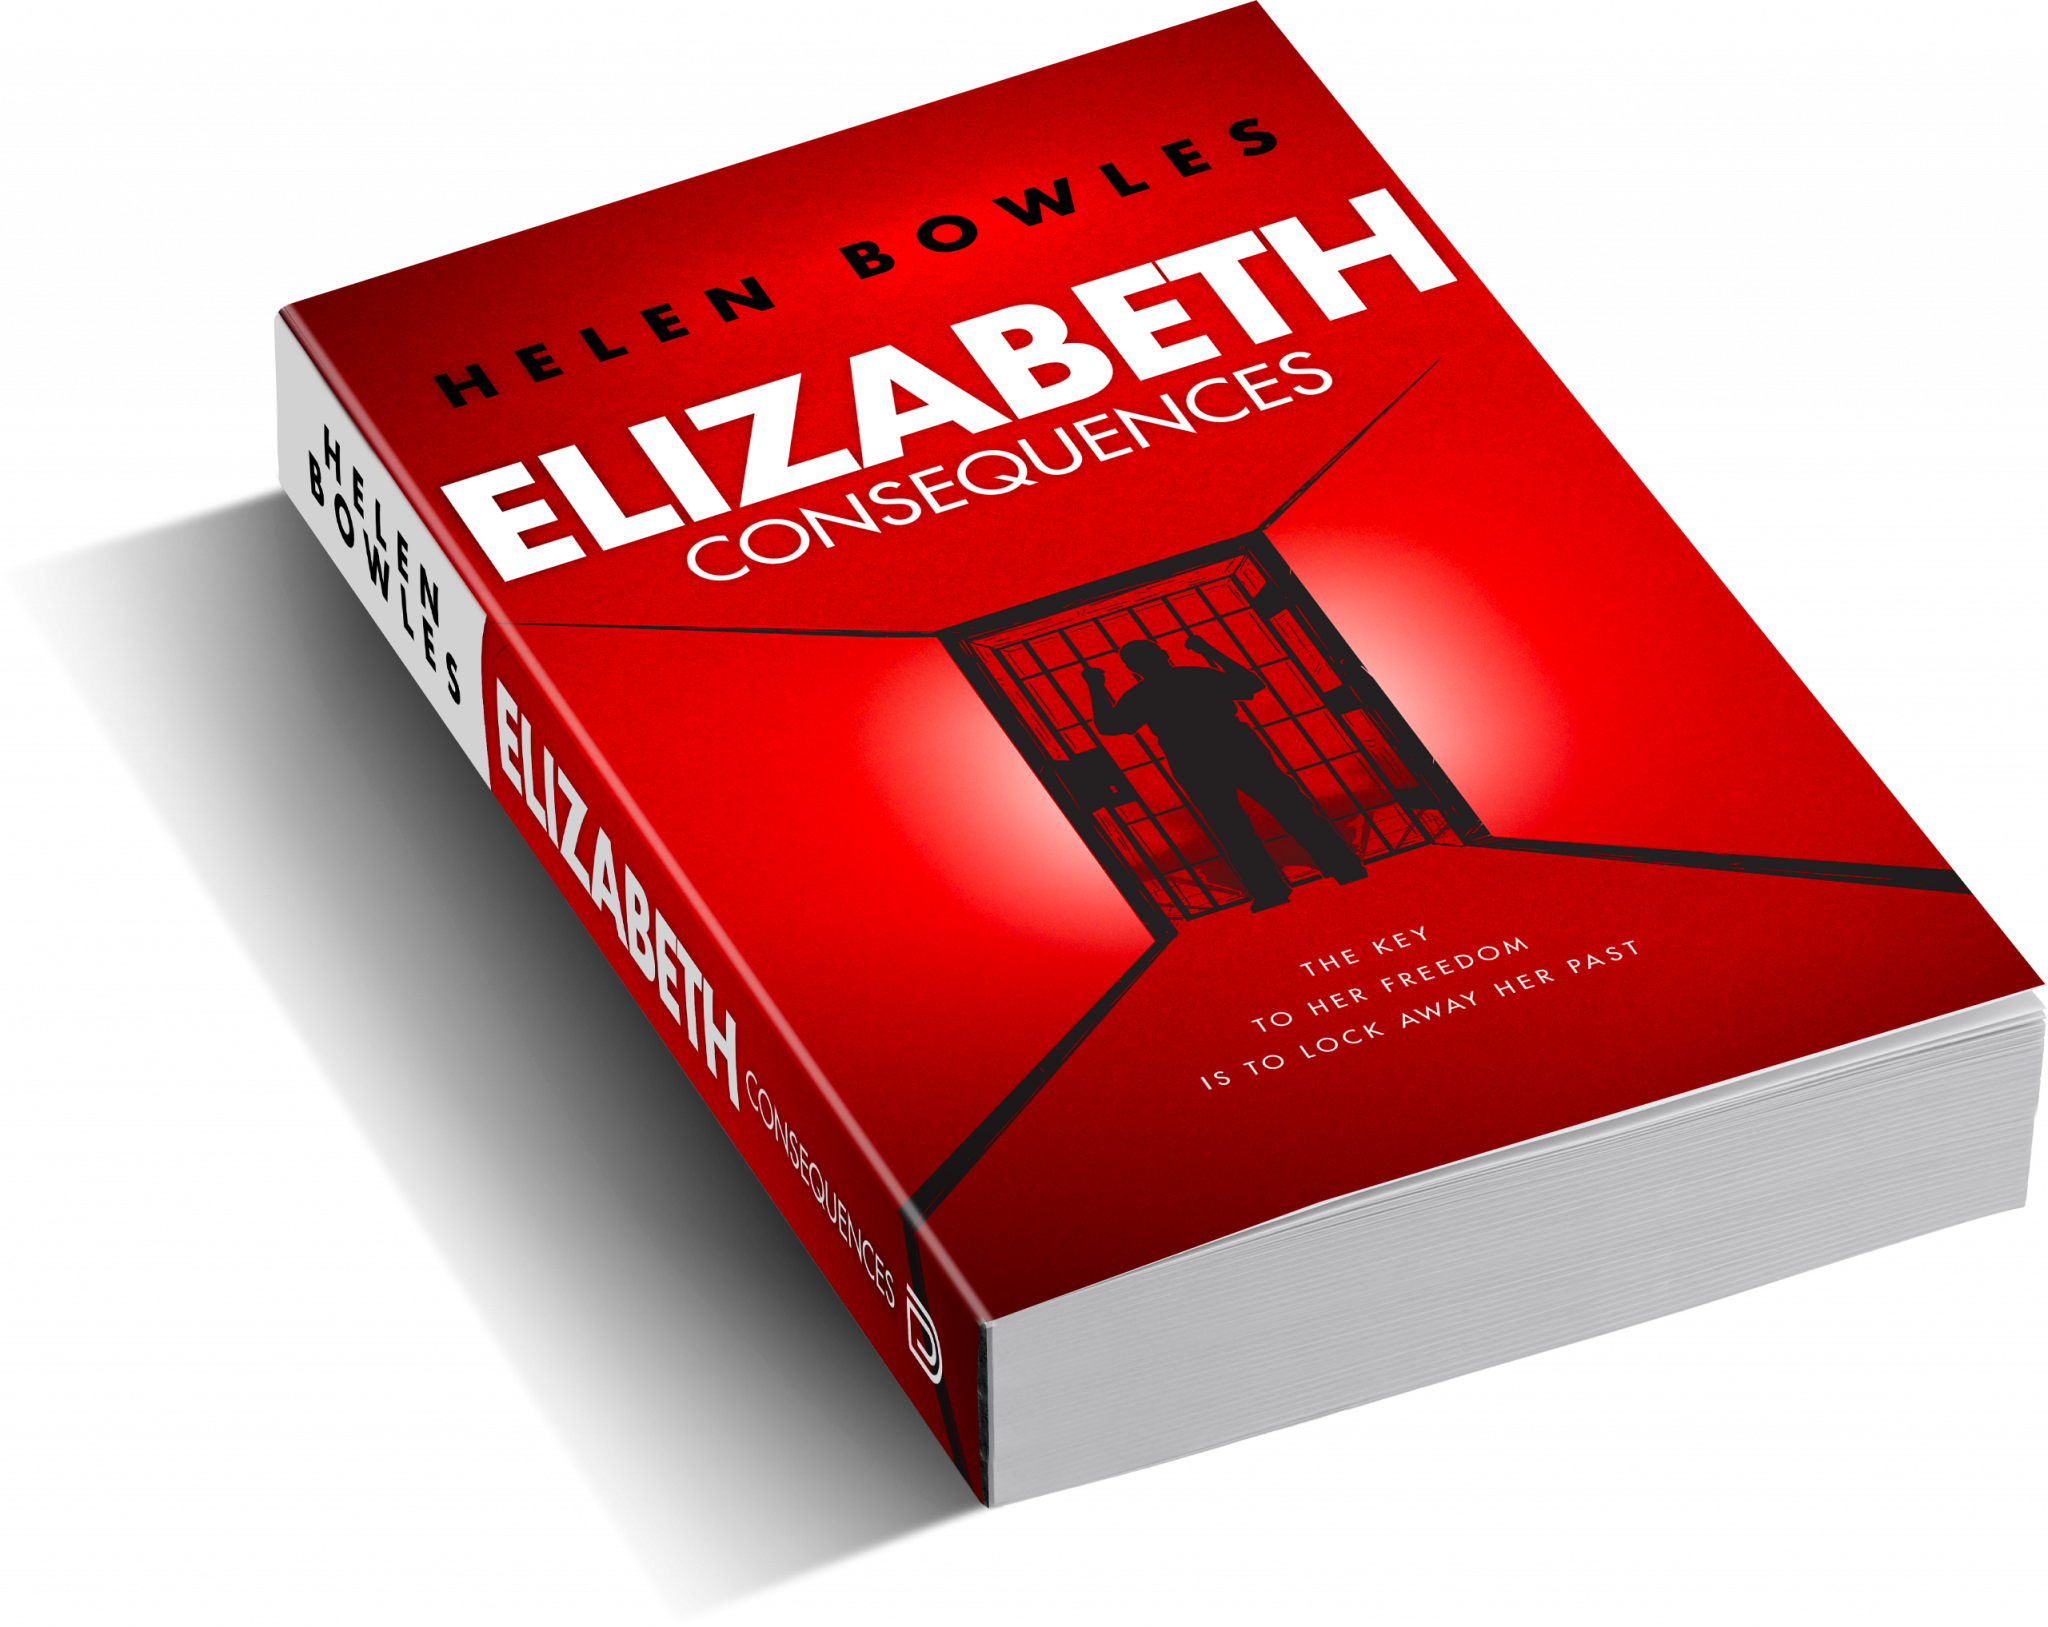 Elizabeth: Consequences by Helen Bowles author